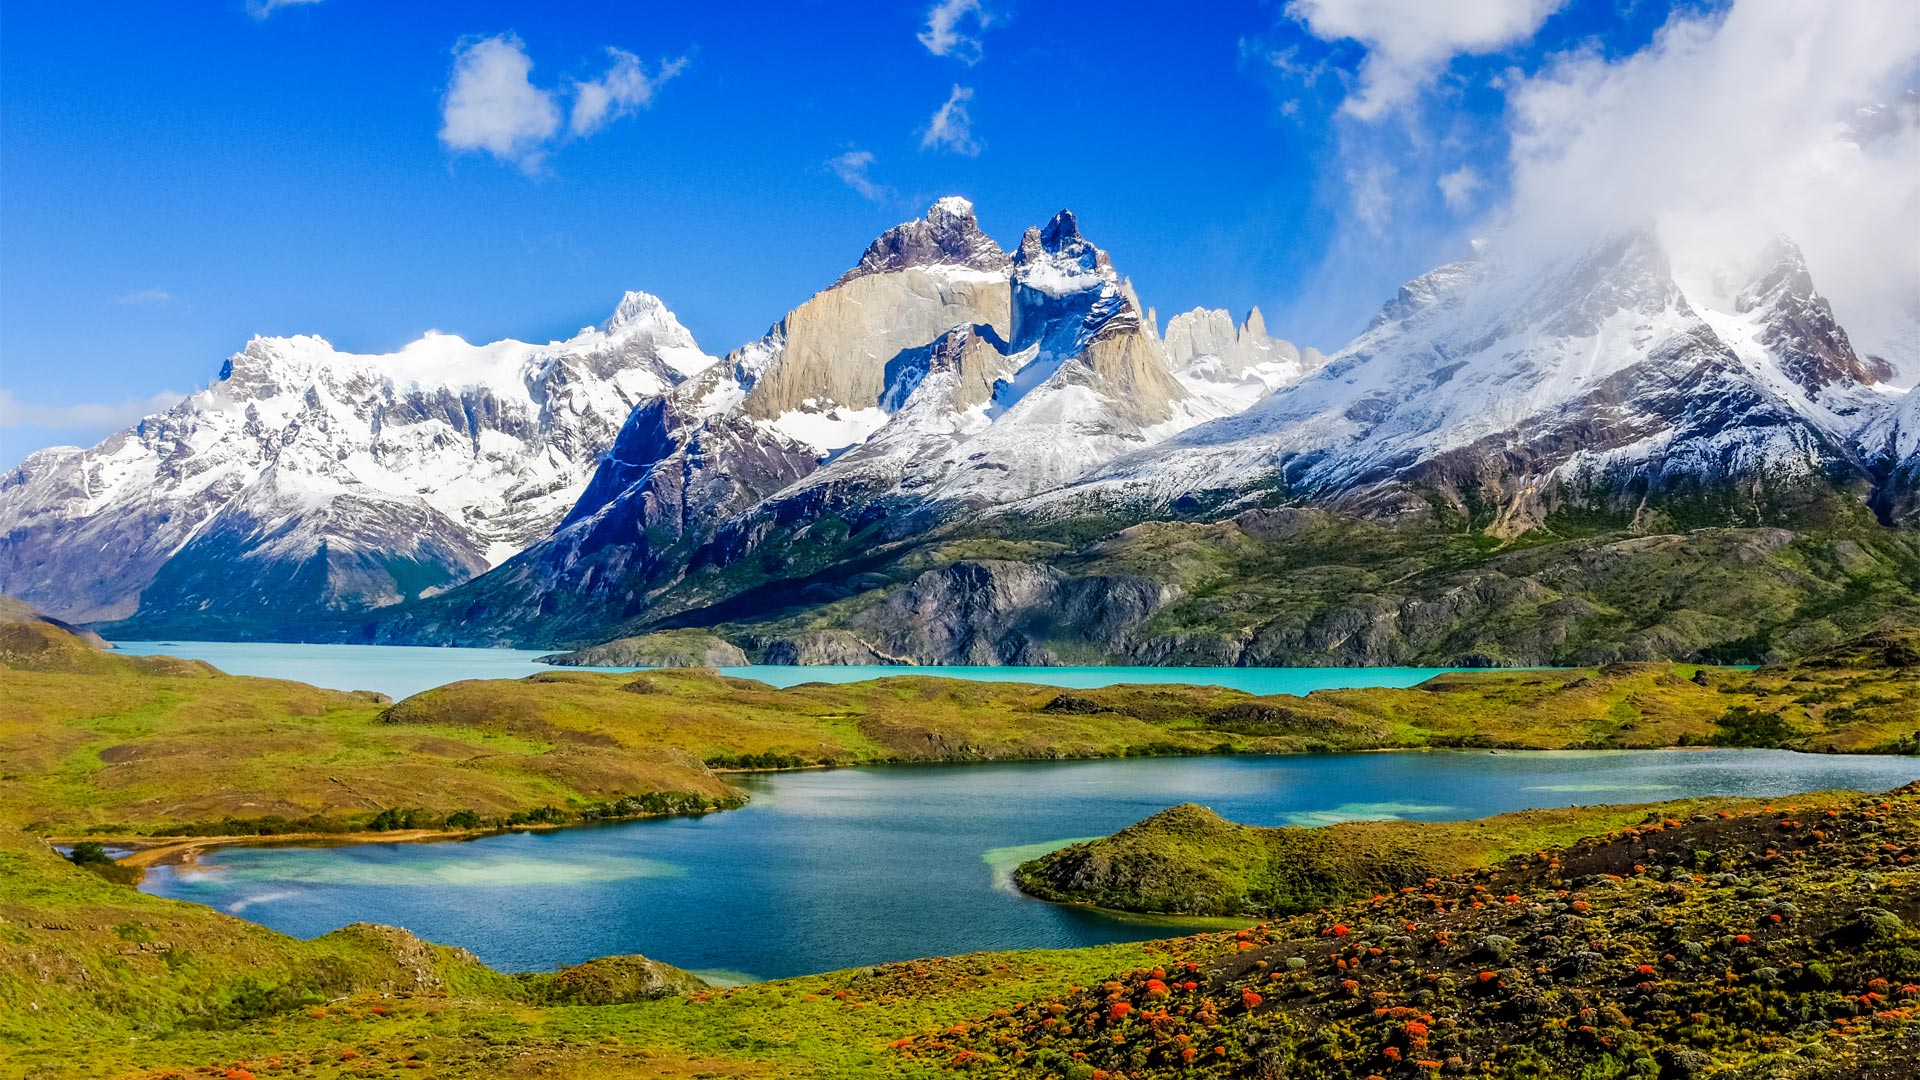 An image of Torres del Paine